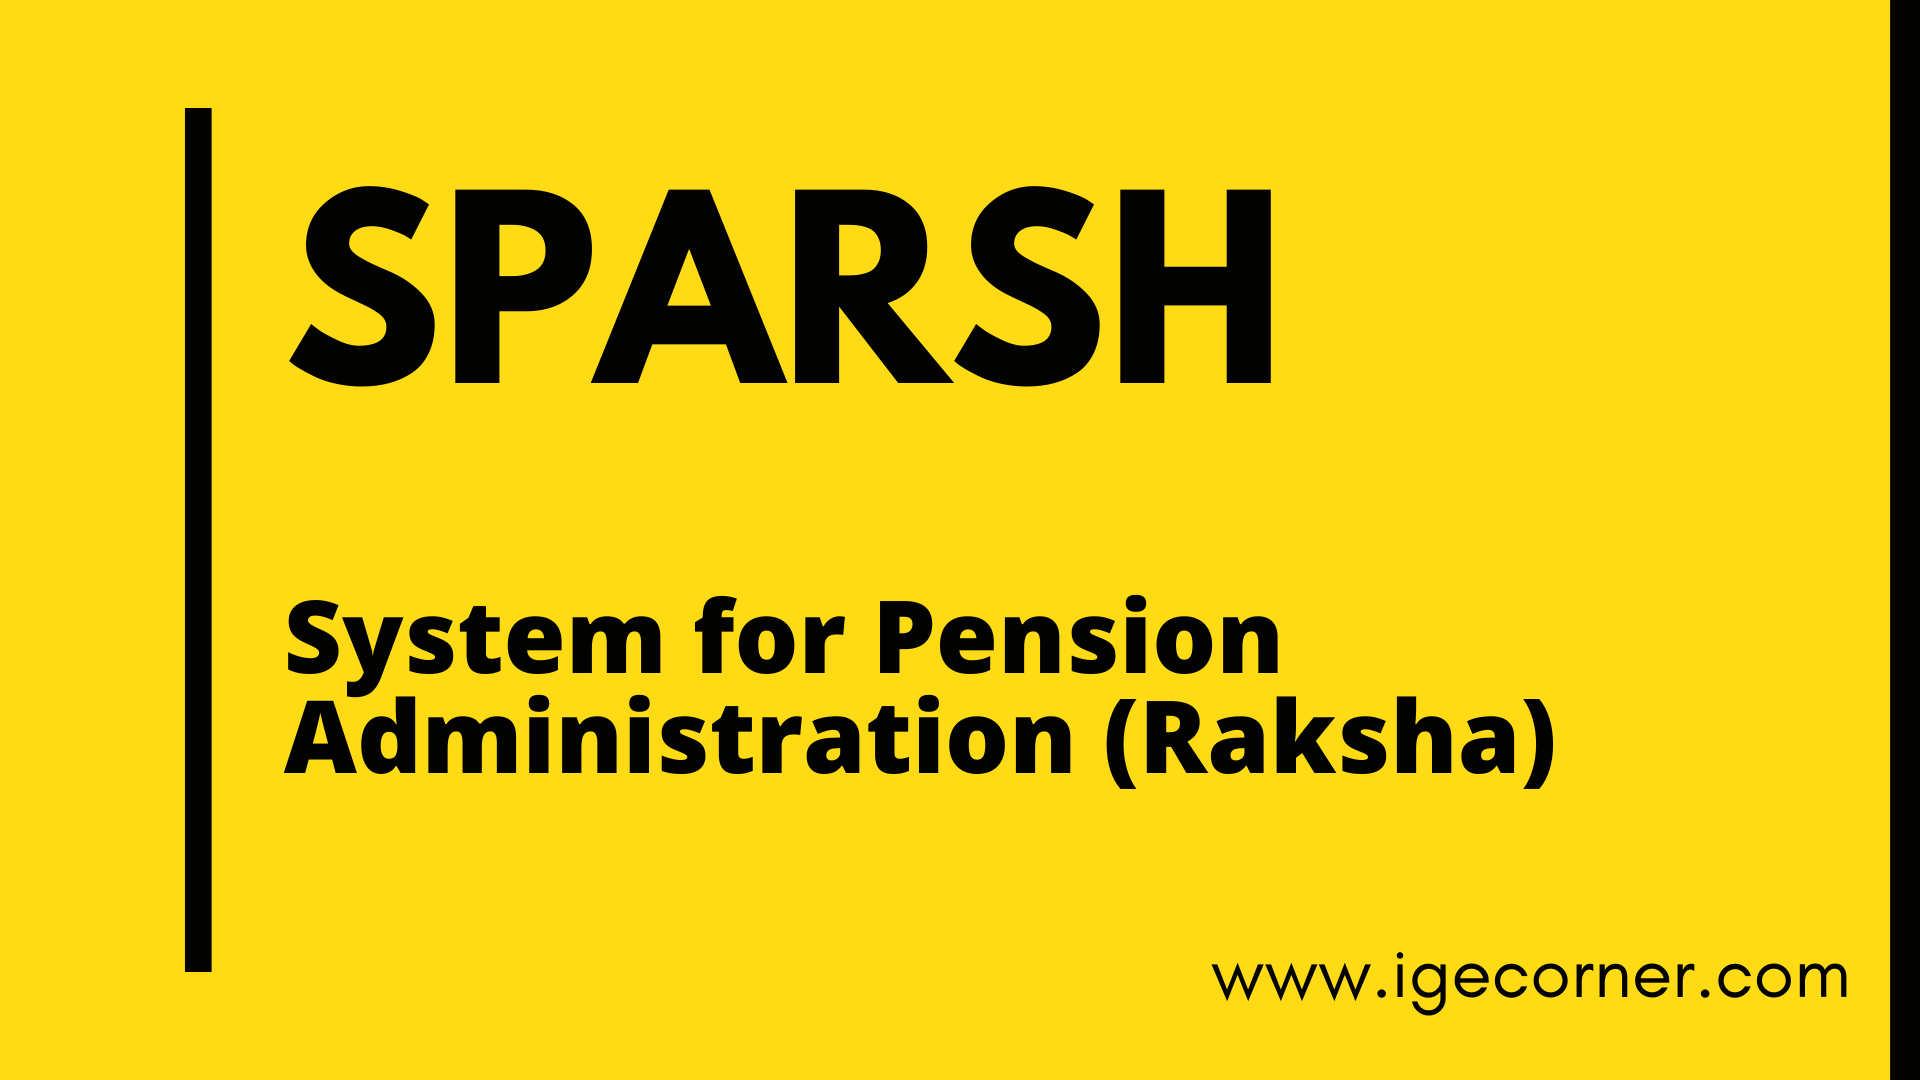 SPARSH Important Notice: Submission of Annual Life Certificate by 20th March, 2023 - Central Government Employees News